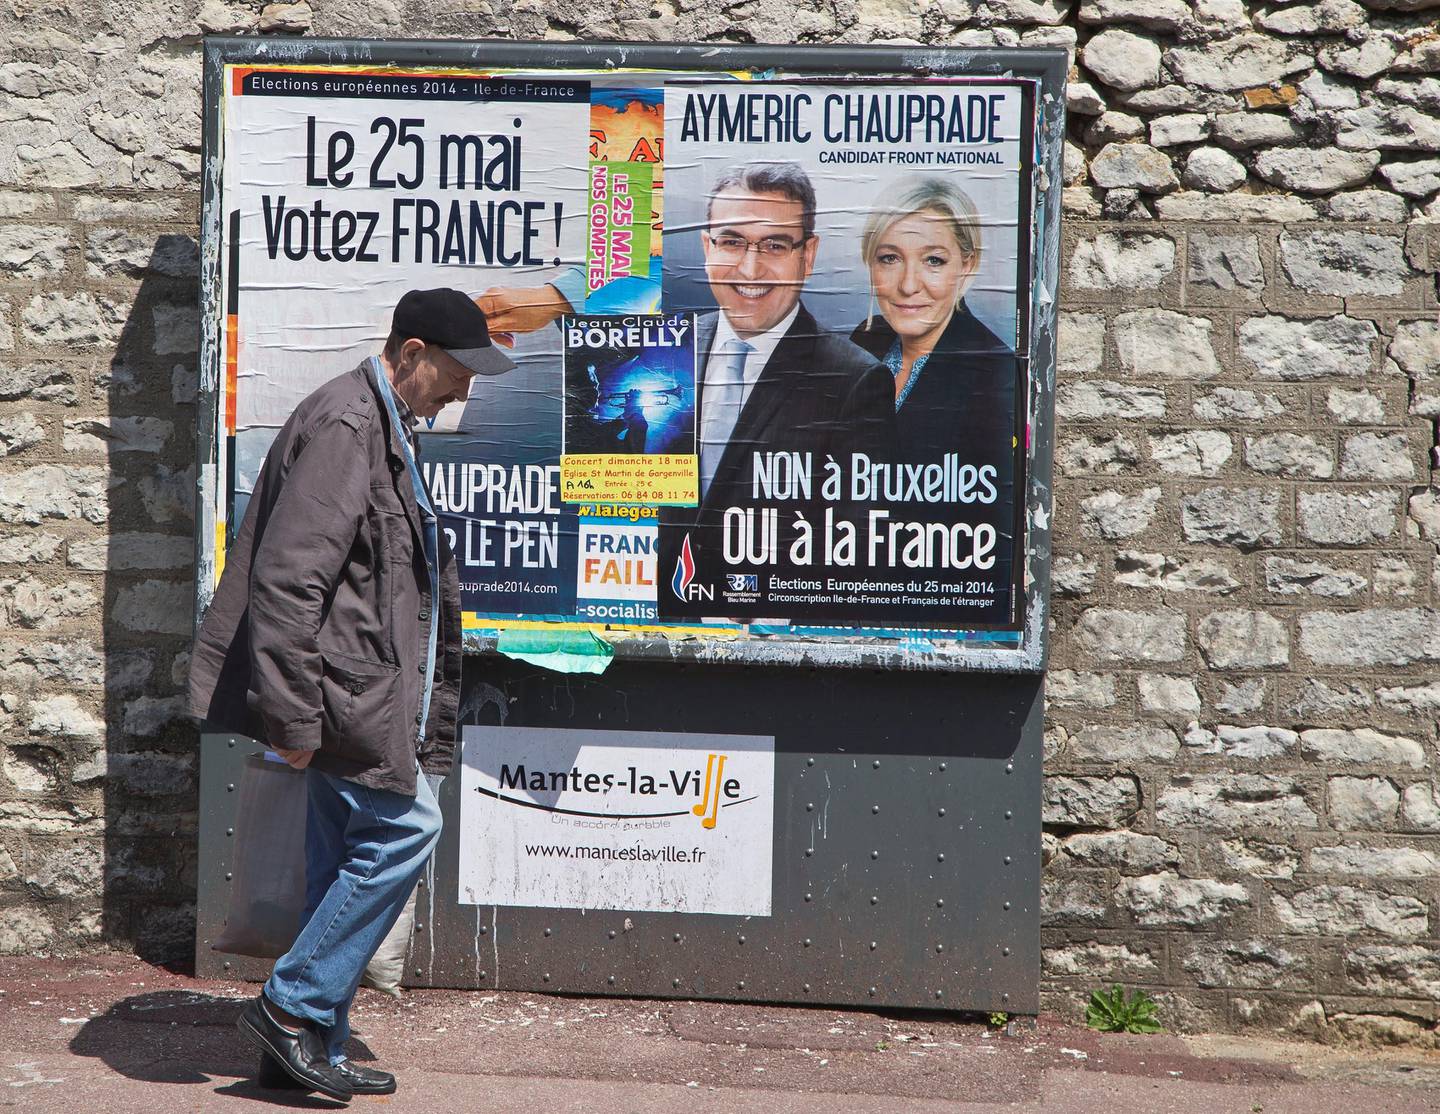 A man walks past campaign posters of the National Front far-right party in Mantes la Ville, north west of Paris, Friday, May 16, 2014. A new mosque for Muslims approved last year and paid with a heavy deposit is suddenly in limbo in a town outside Paris, and new shops in a southern town that reflect Muslims' traditions will be banned. Newly-installed far-right mayors in Mantes-la-Ville, west of the French capital, and in Beaucaire, in southwest France, are rolling out their programs and the large Muslim populations in their towns risk getting crushed. Poster left reads,"May 25 vote for France", poster right, with the pictures of the candidate of National Front far-right party for the European parliament election Aymeric Chauprade  and their leader Marine Le Pen which reads"Brussels No, France Yes". (AP Photo/Michel Euler)